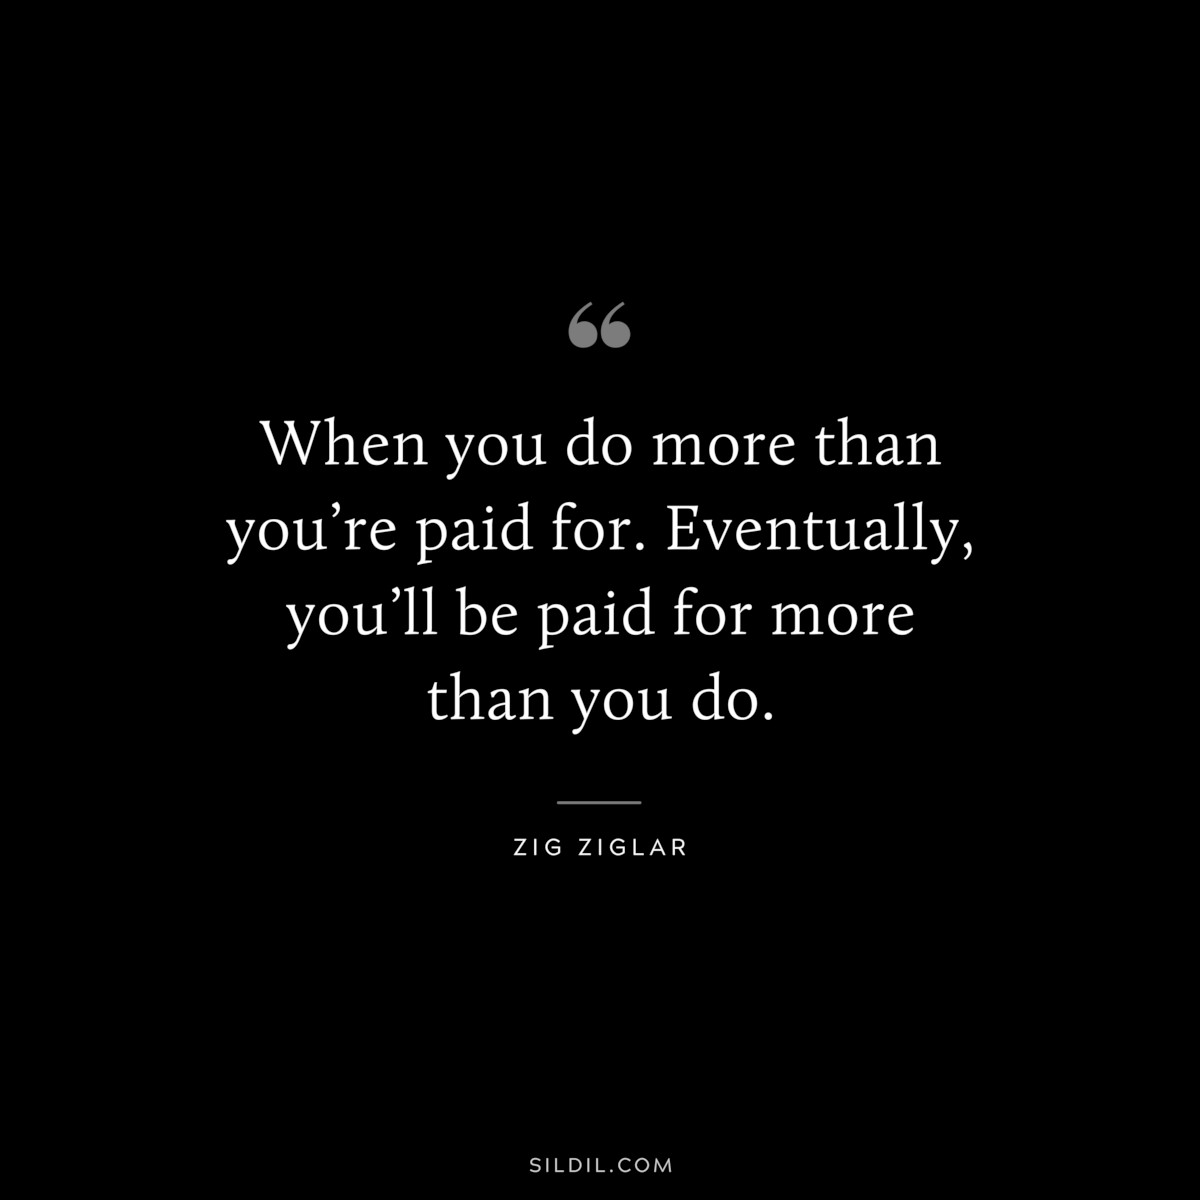 When you do more than you’re paid for. Eventually, you’ll be paid for more than you do. ― Zig Ziglar